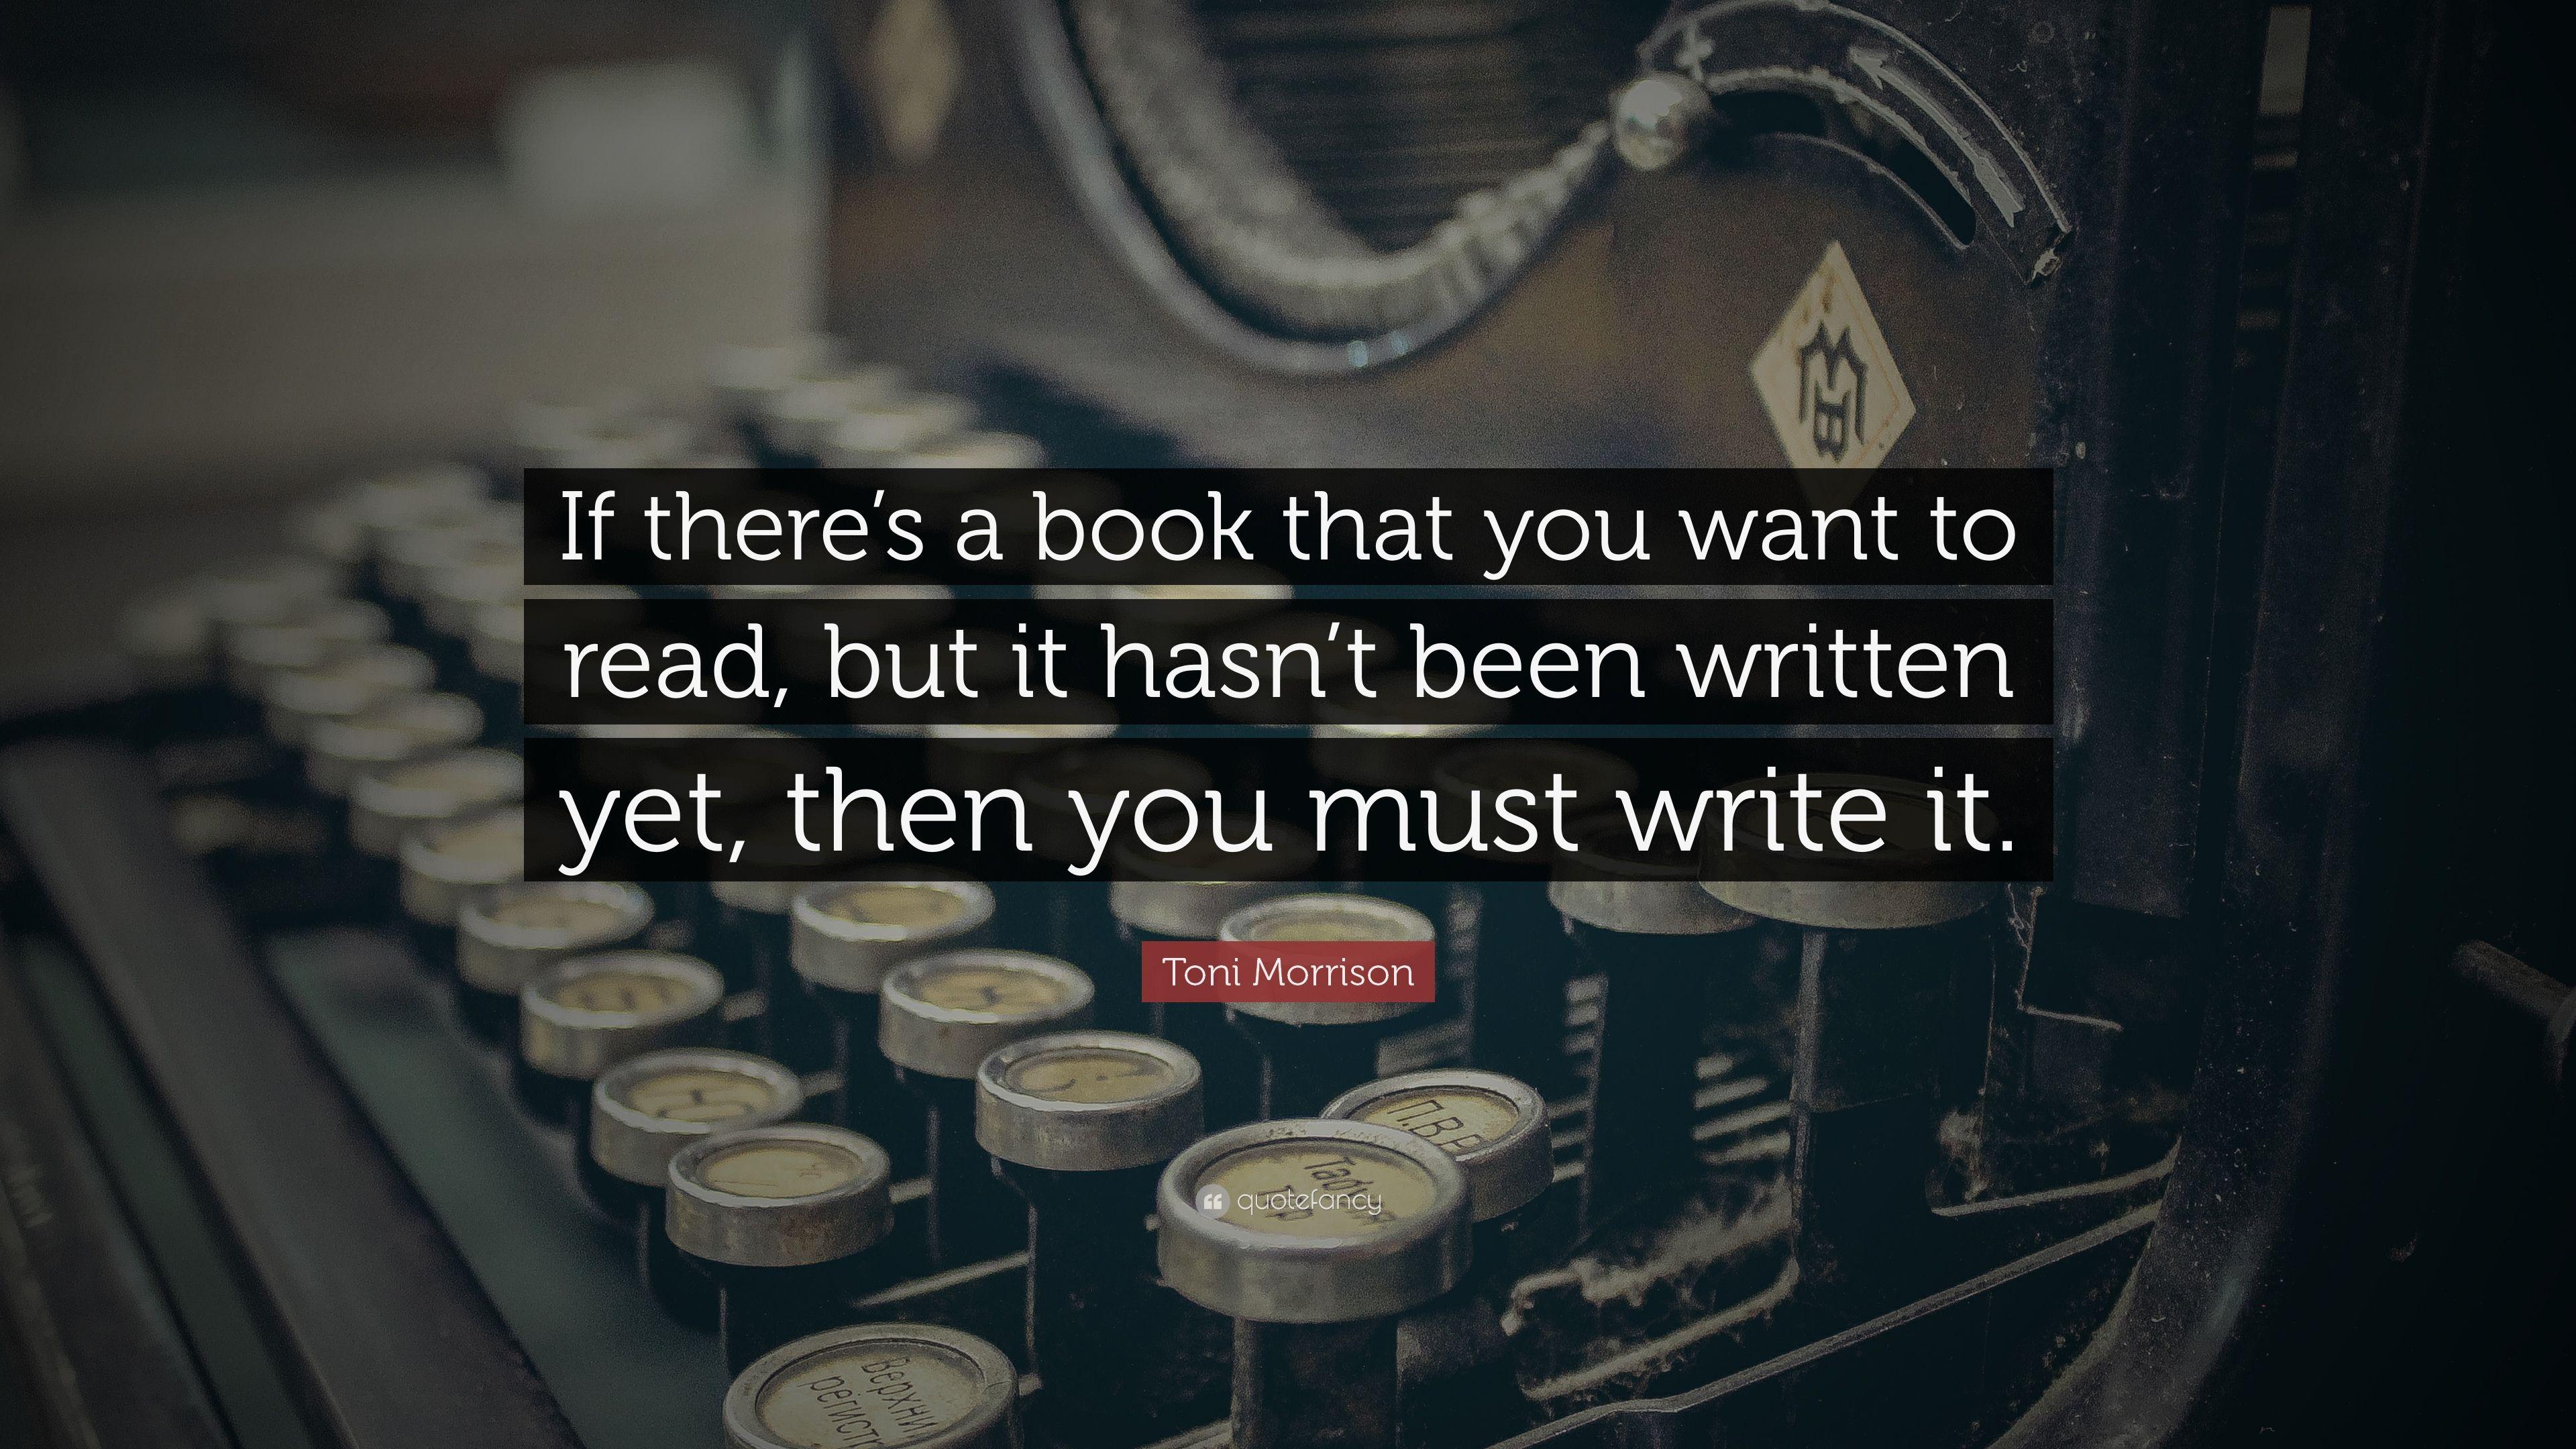 Toni Morrison Quote: “If there's a book that you want to read, but